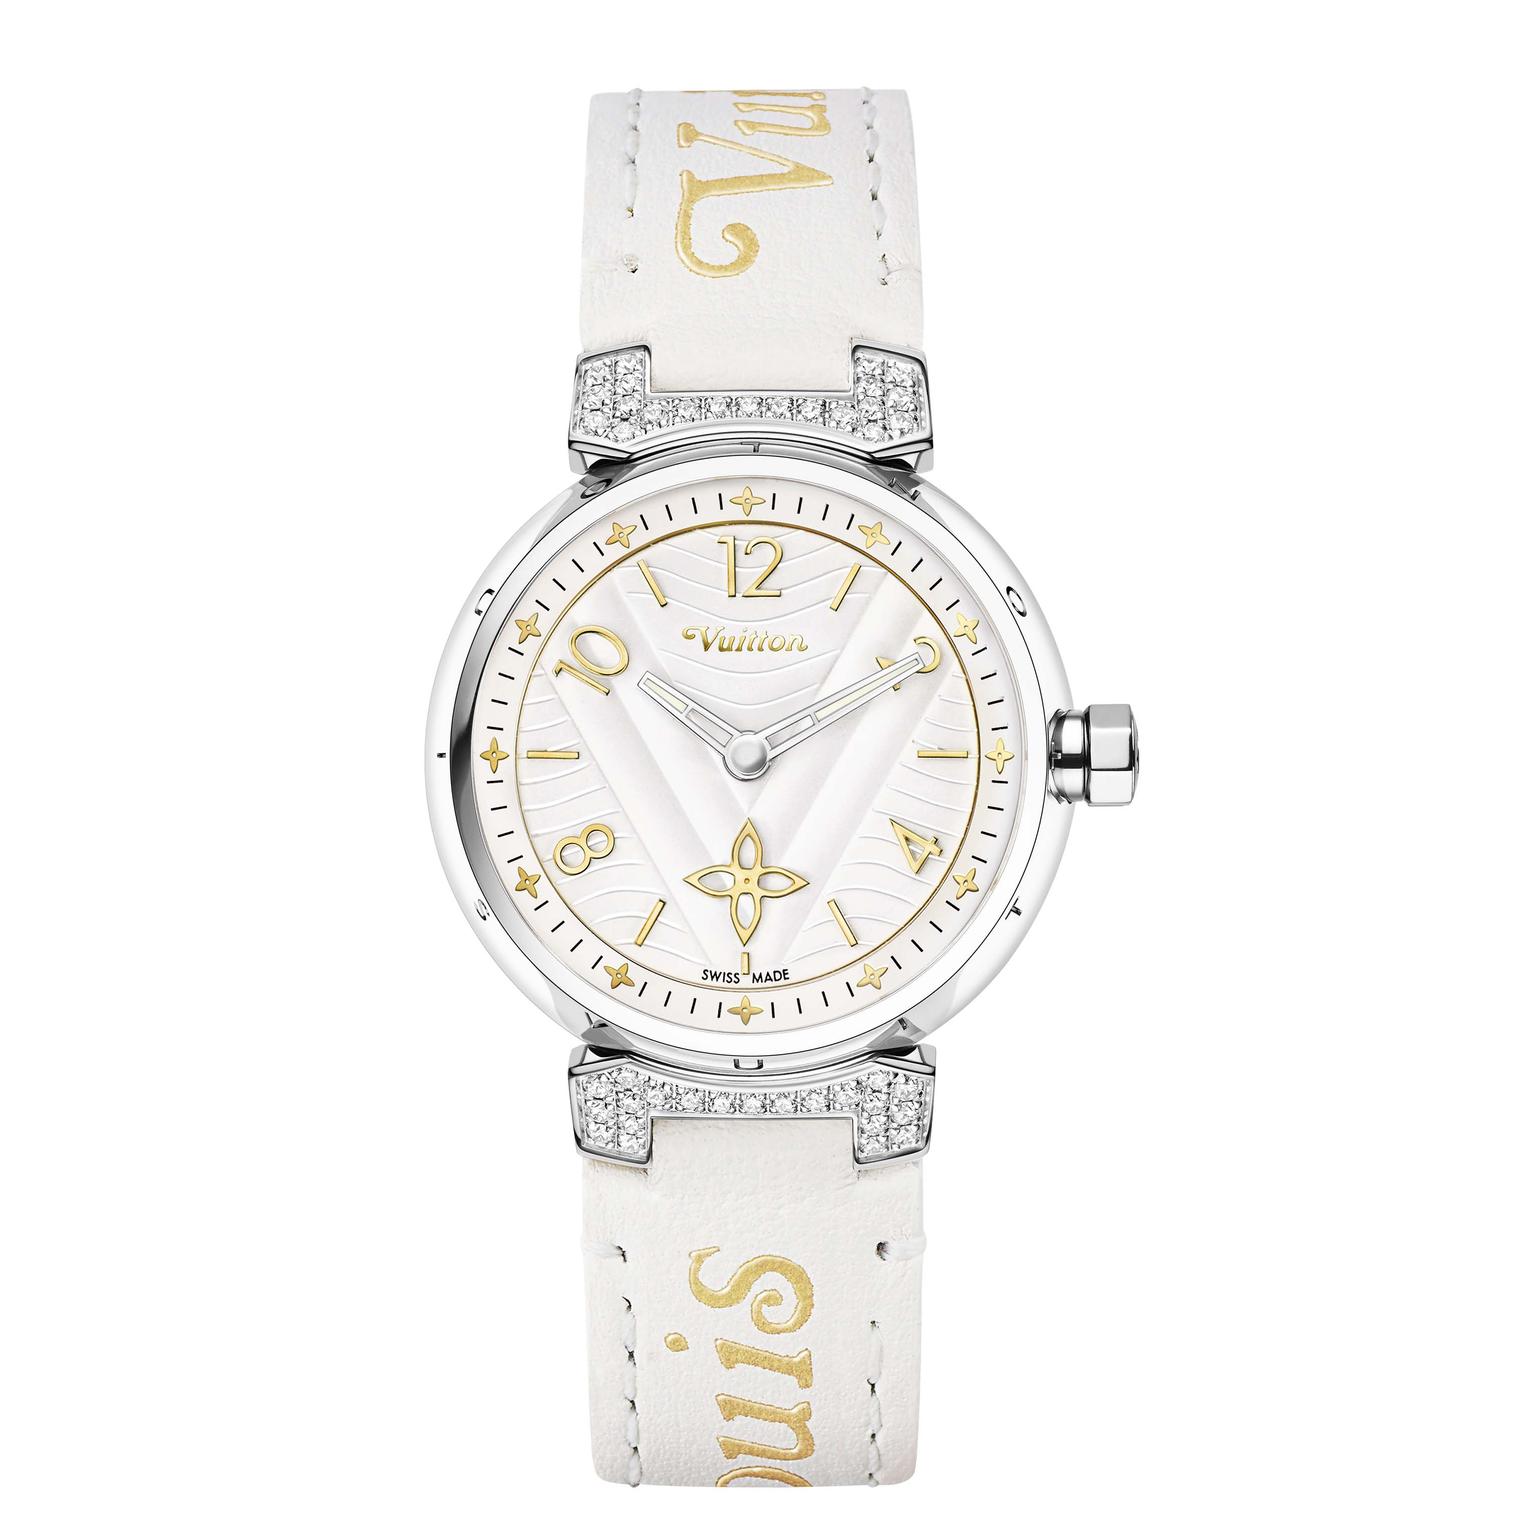 Louis Vuitton Tambour New Wave 34 mm watch with diamonds